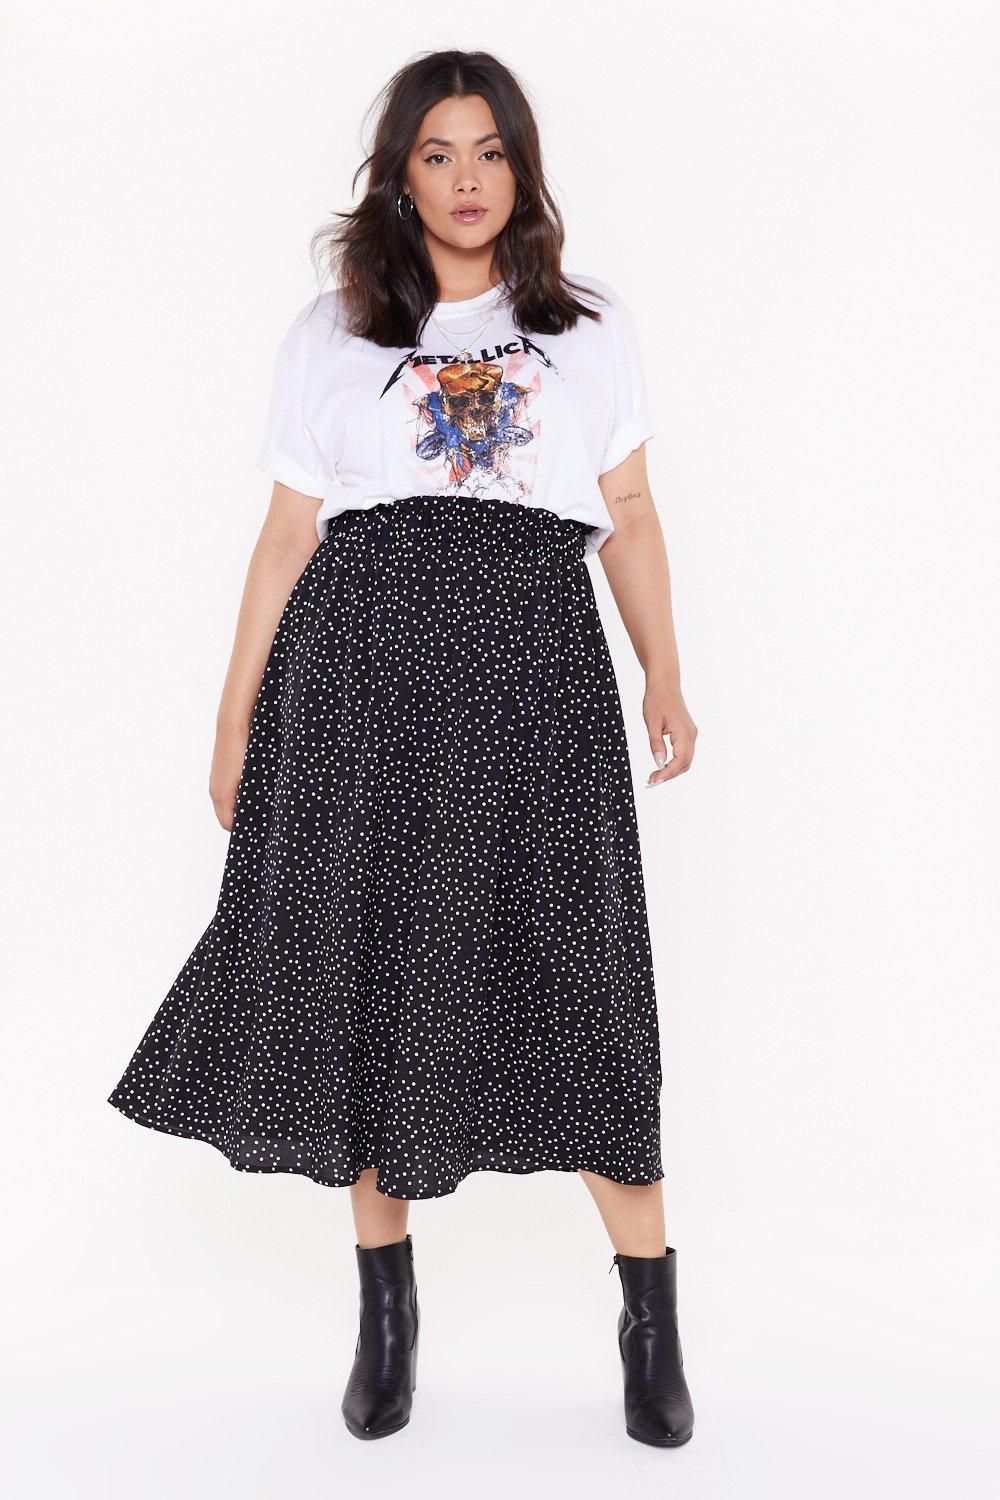 Plus Size Skirts: Look Perfect